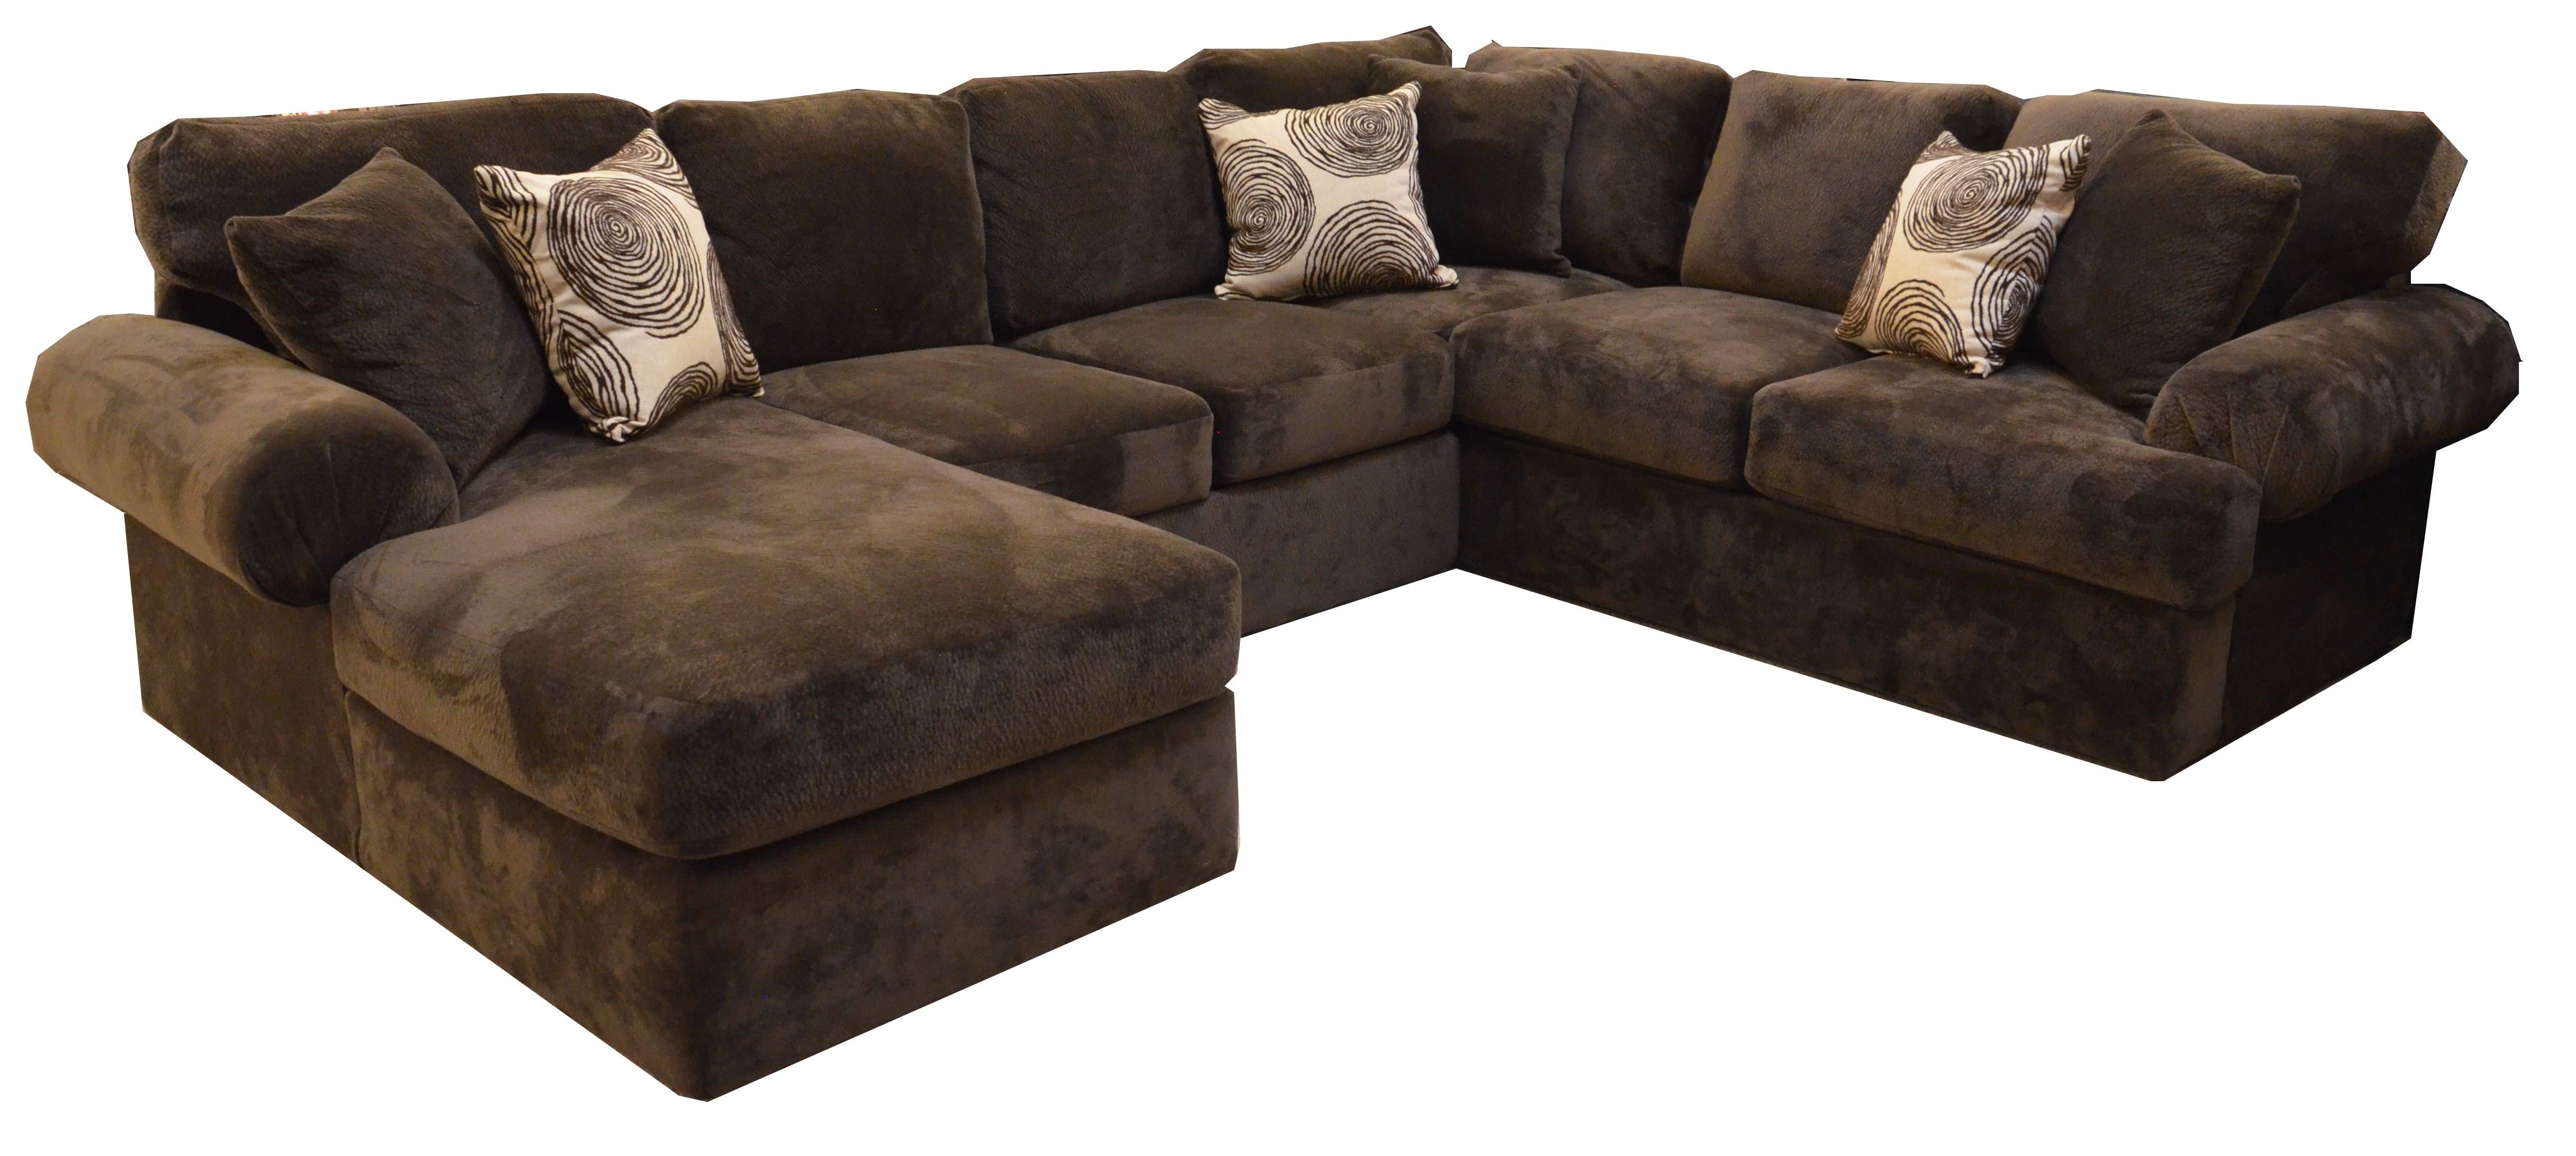 Wonderful Bradley Sectional Sofa 54 For Your 7 Seat Sectional Sofa Intended For Bradley Sectional Sofas (View 4 of 15)